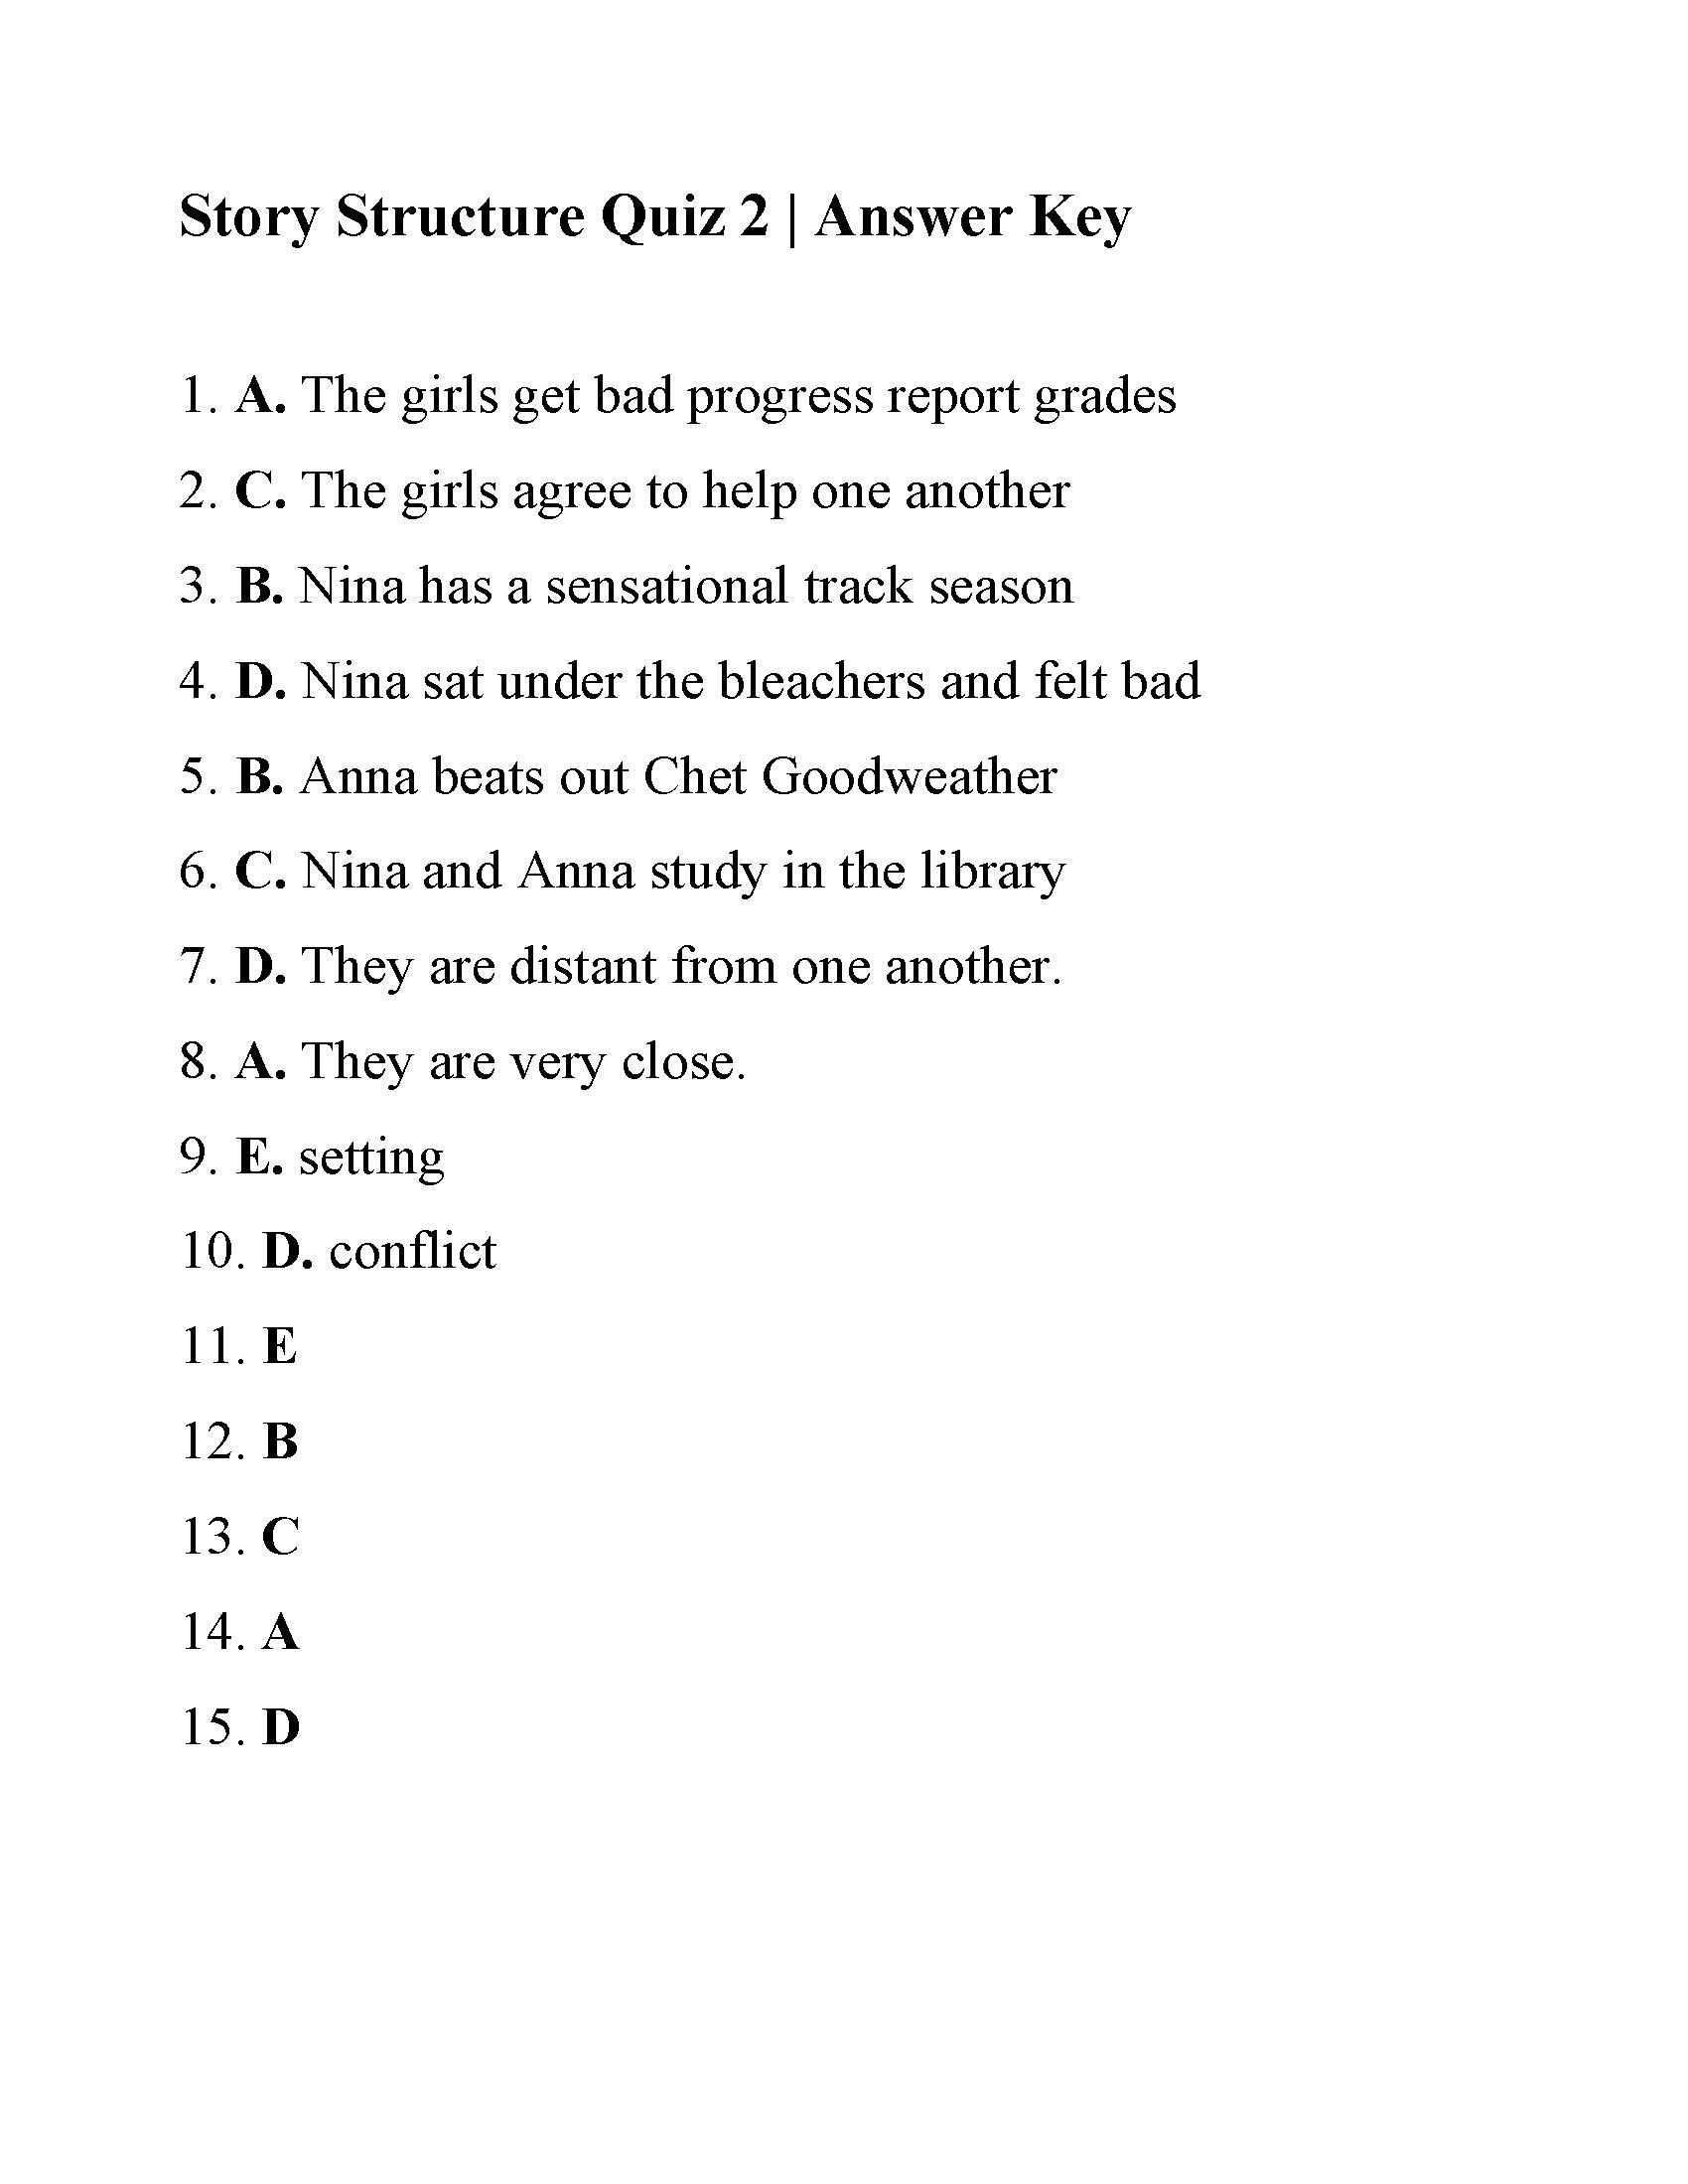 Properties Of Water Worksheet This is the Answer Key for the Story Structure Quiz 2